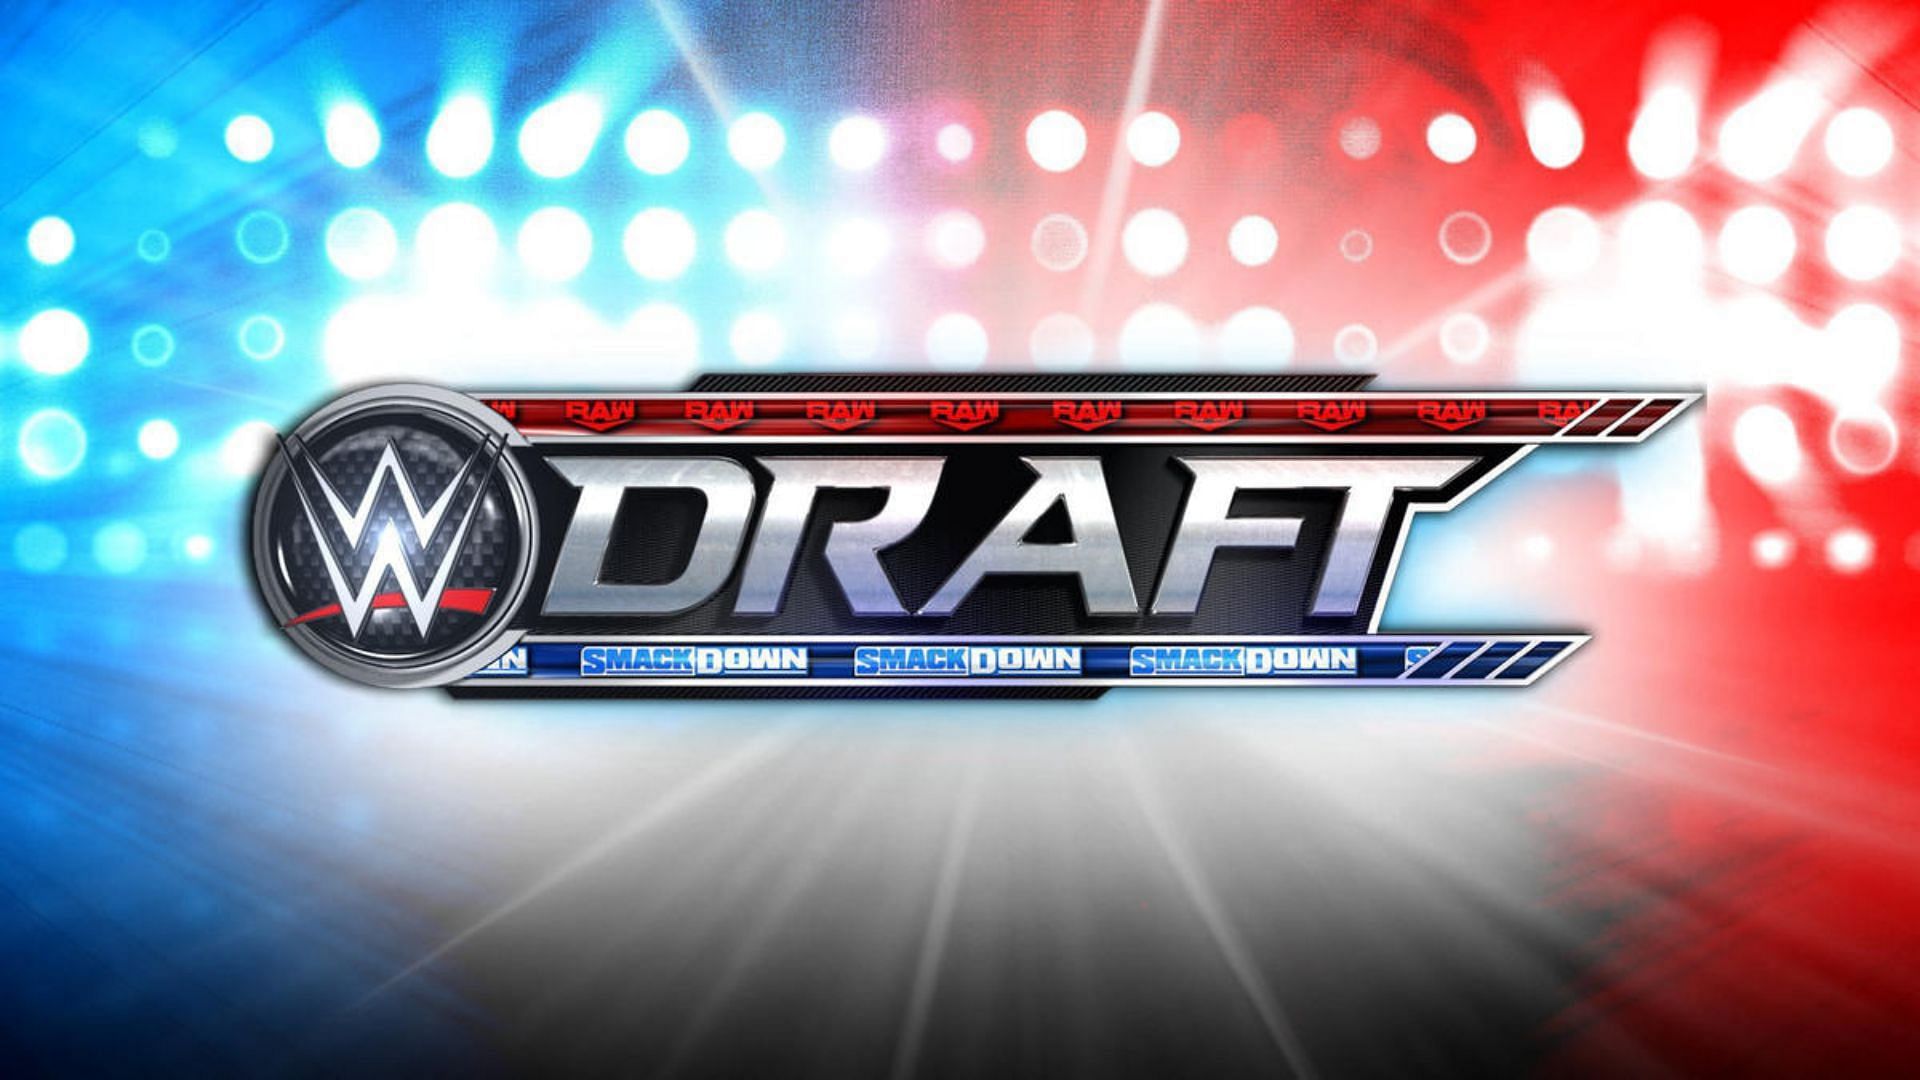 WWE RAW and SmackDown are headed for Draft 2023!